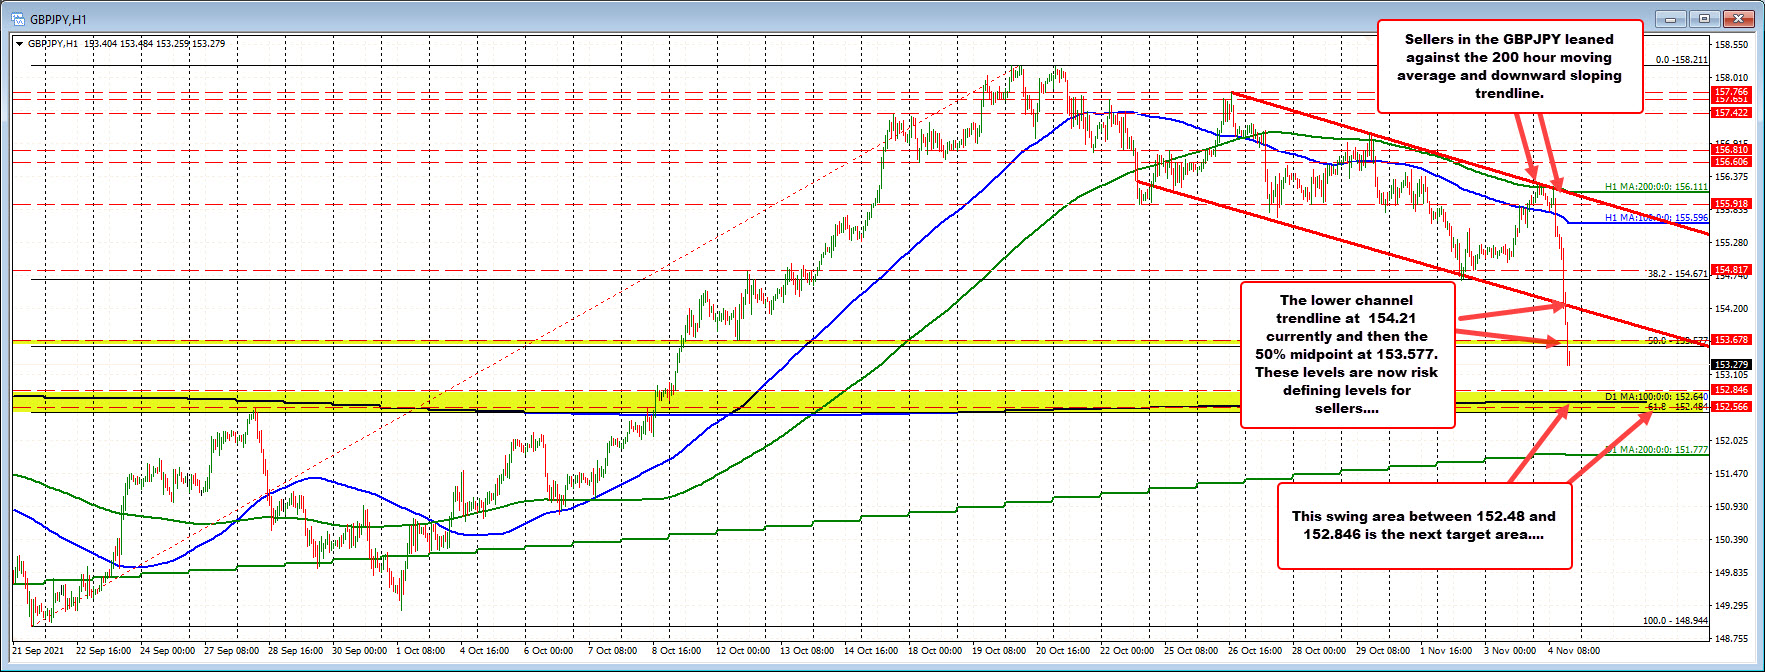 GBPJPY on the hourly chart